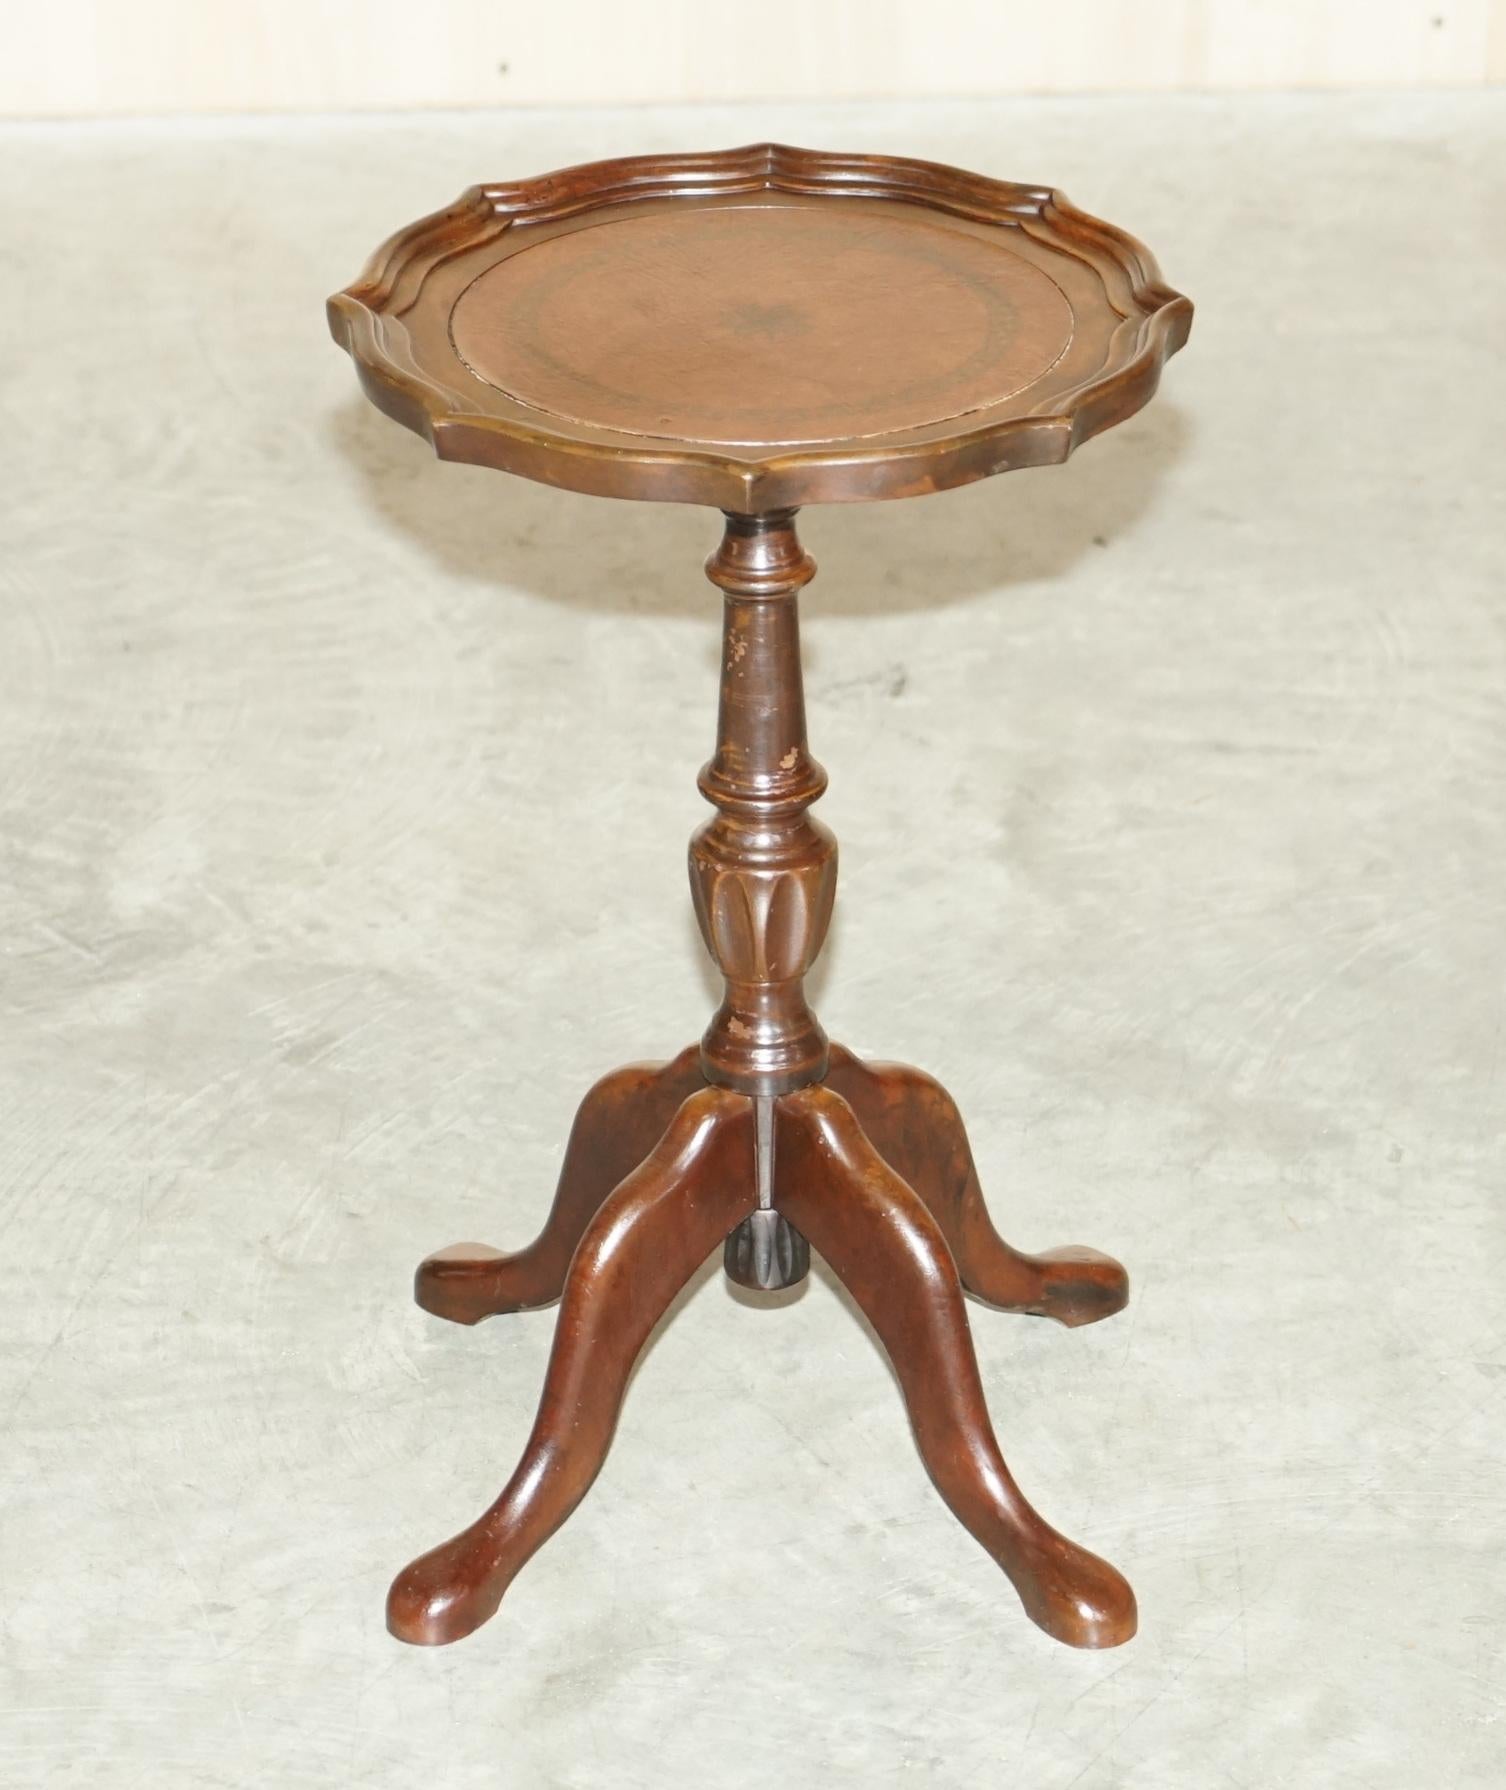 We are delighted to offer for sale this very nice vintage mahogany & brown leather topped four legged table.

A good looking and well made piece, ideally suited for a lamp or glass of wine with a picture frame on it, this is the only one I have